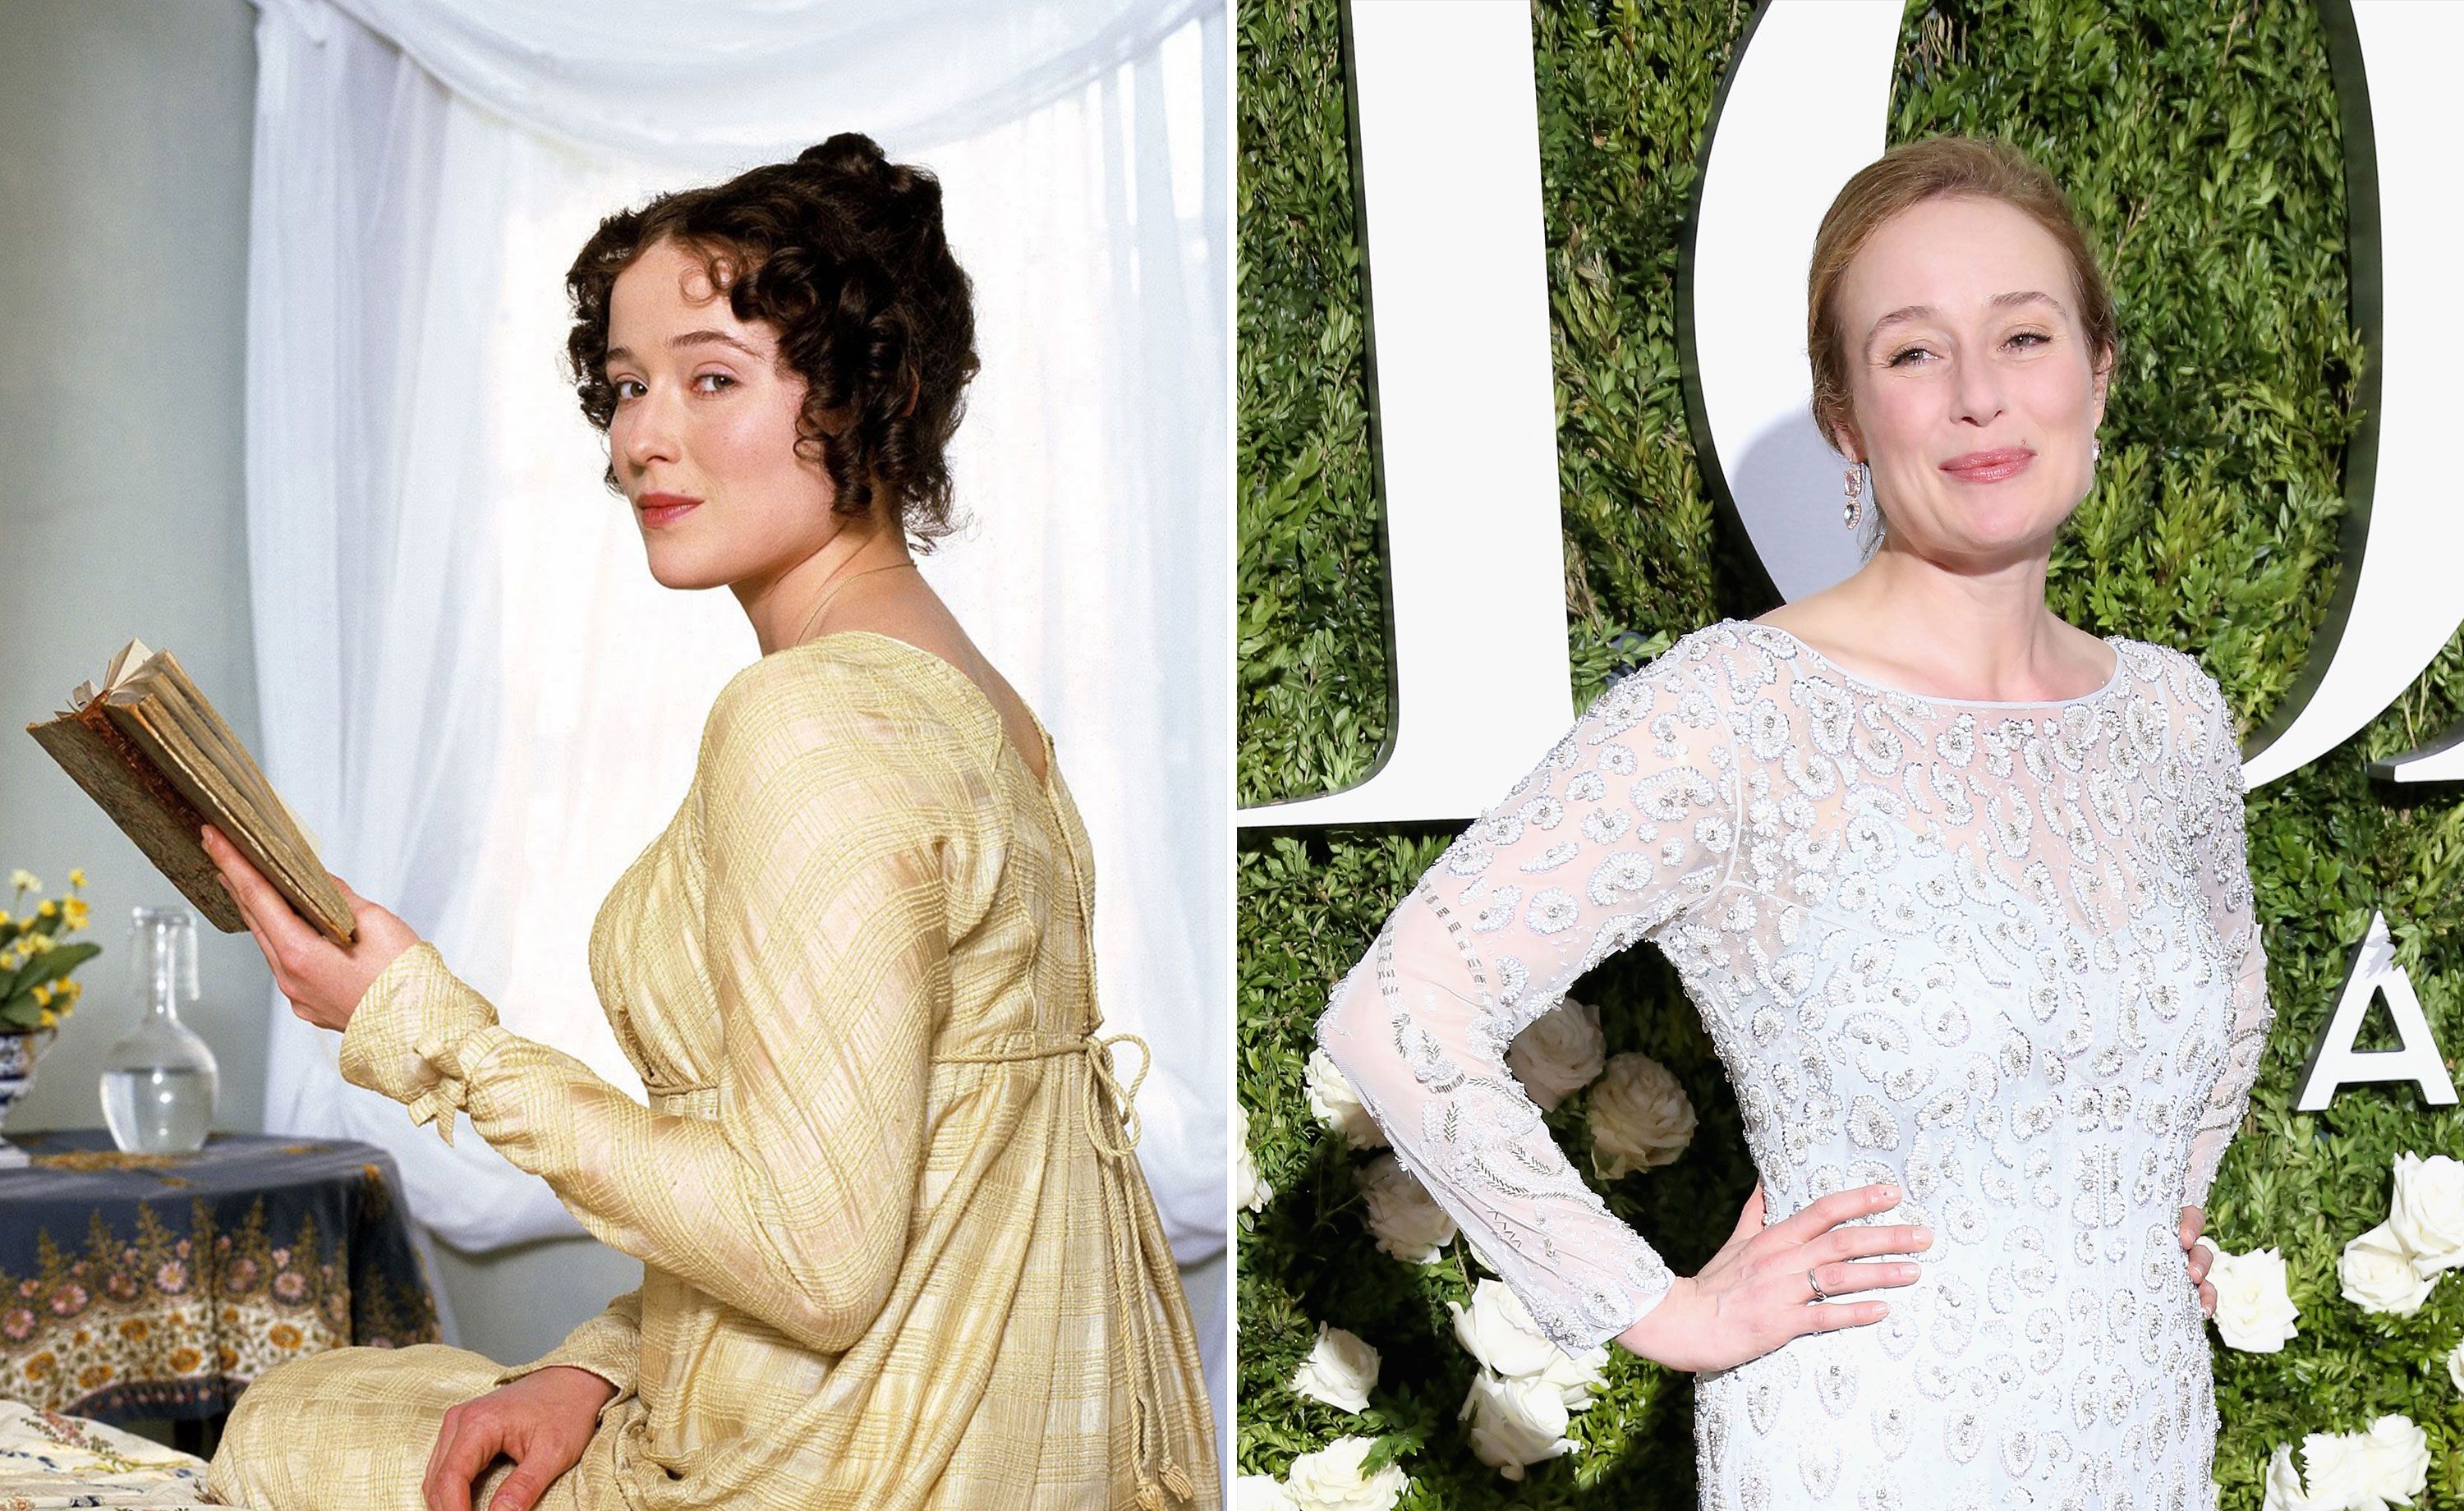 Pride and Prejudice aired 22 years photo